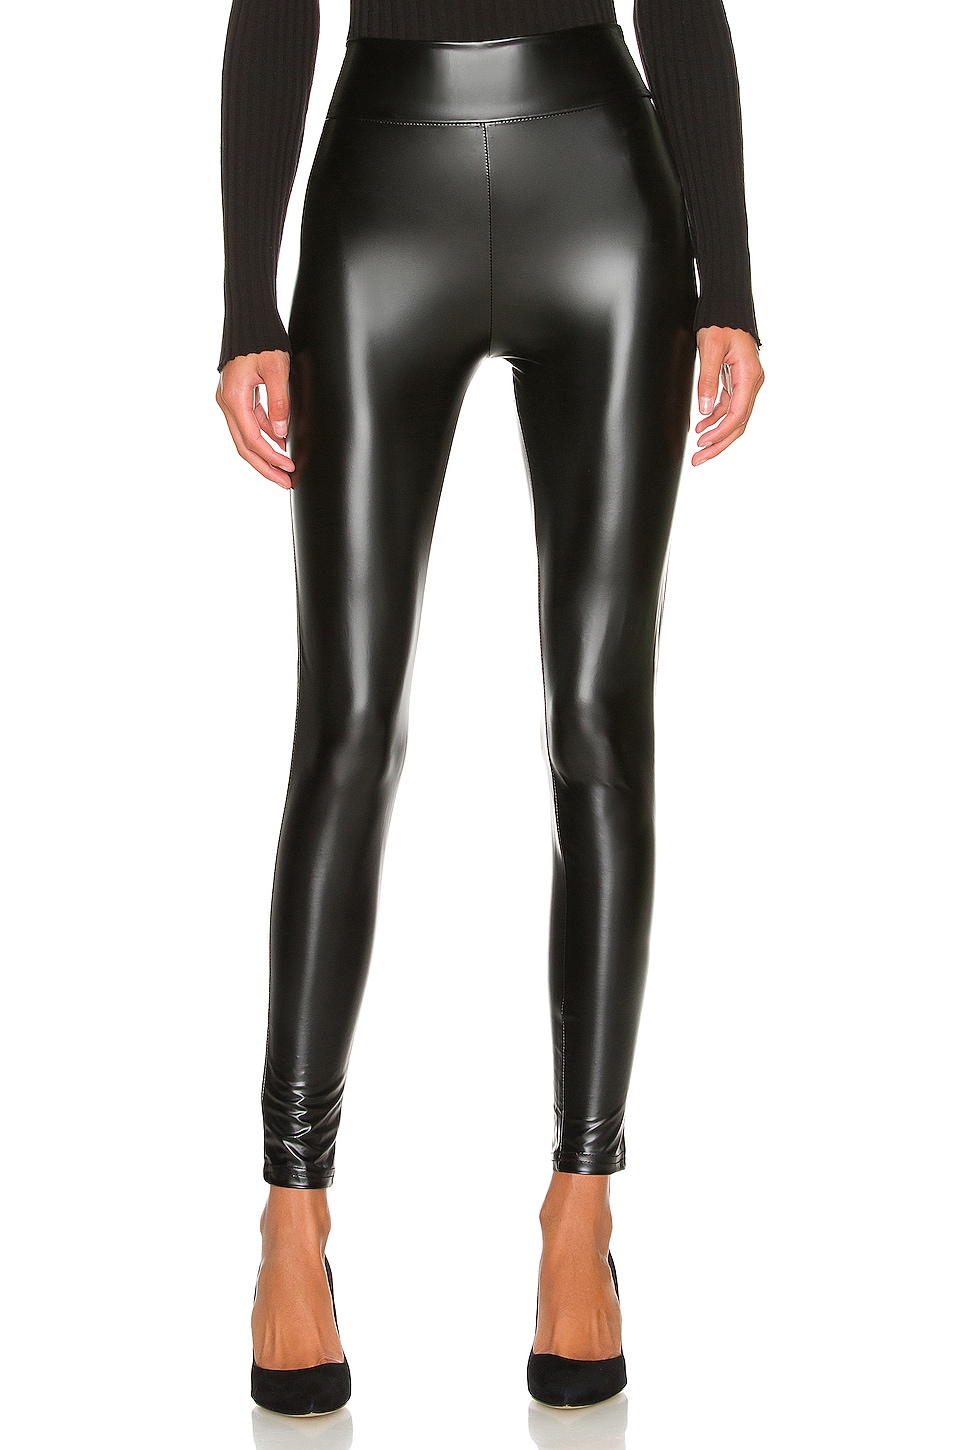 What To Wear With Patent Leather Leggings